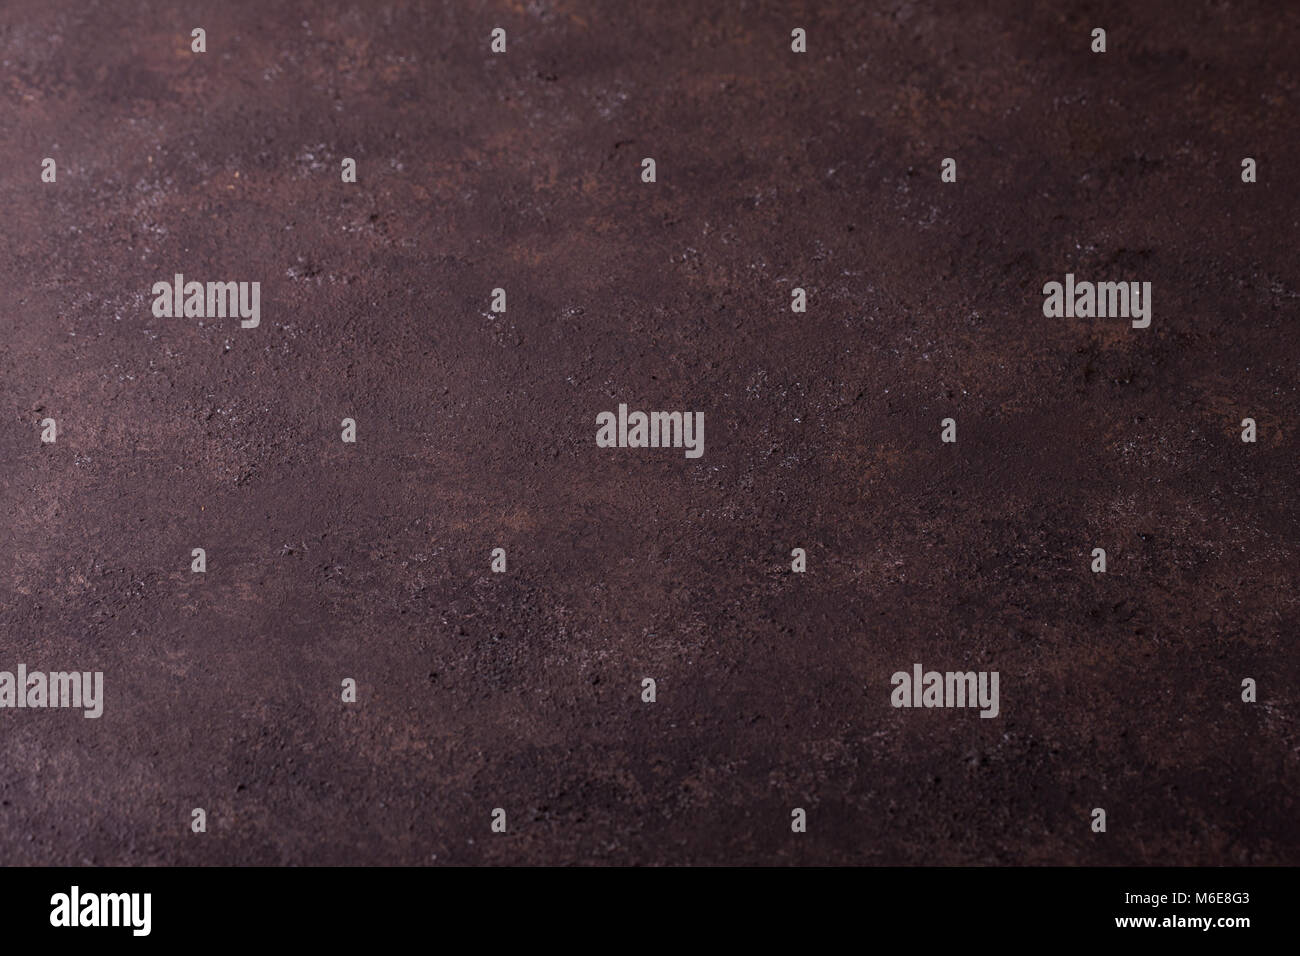 pimples texture background surface, concrete imitation of rusty iron. porous flat wall of brown color, pimples, copy space. Texture of rough surface Stock Photo